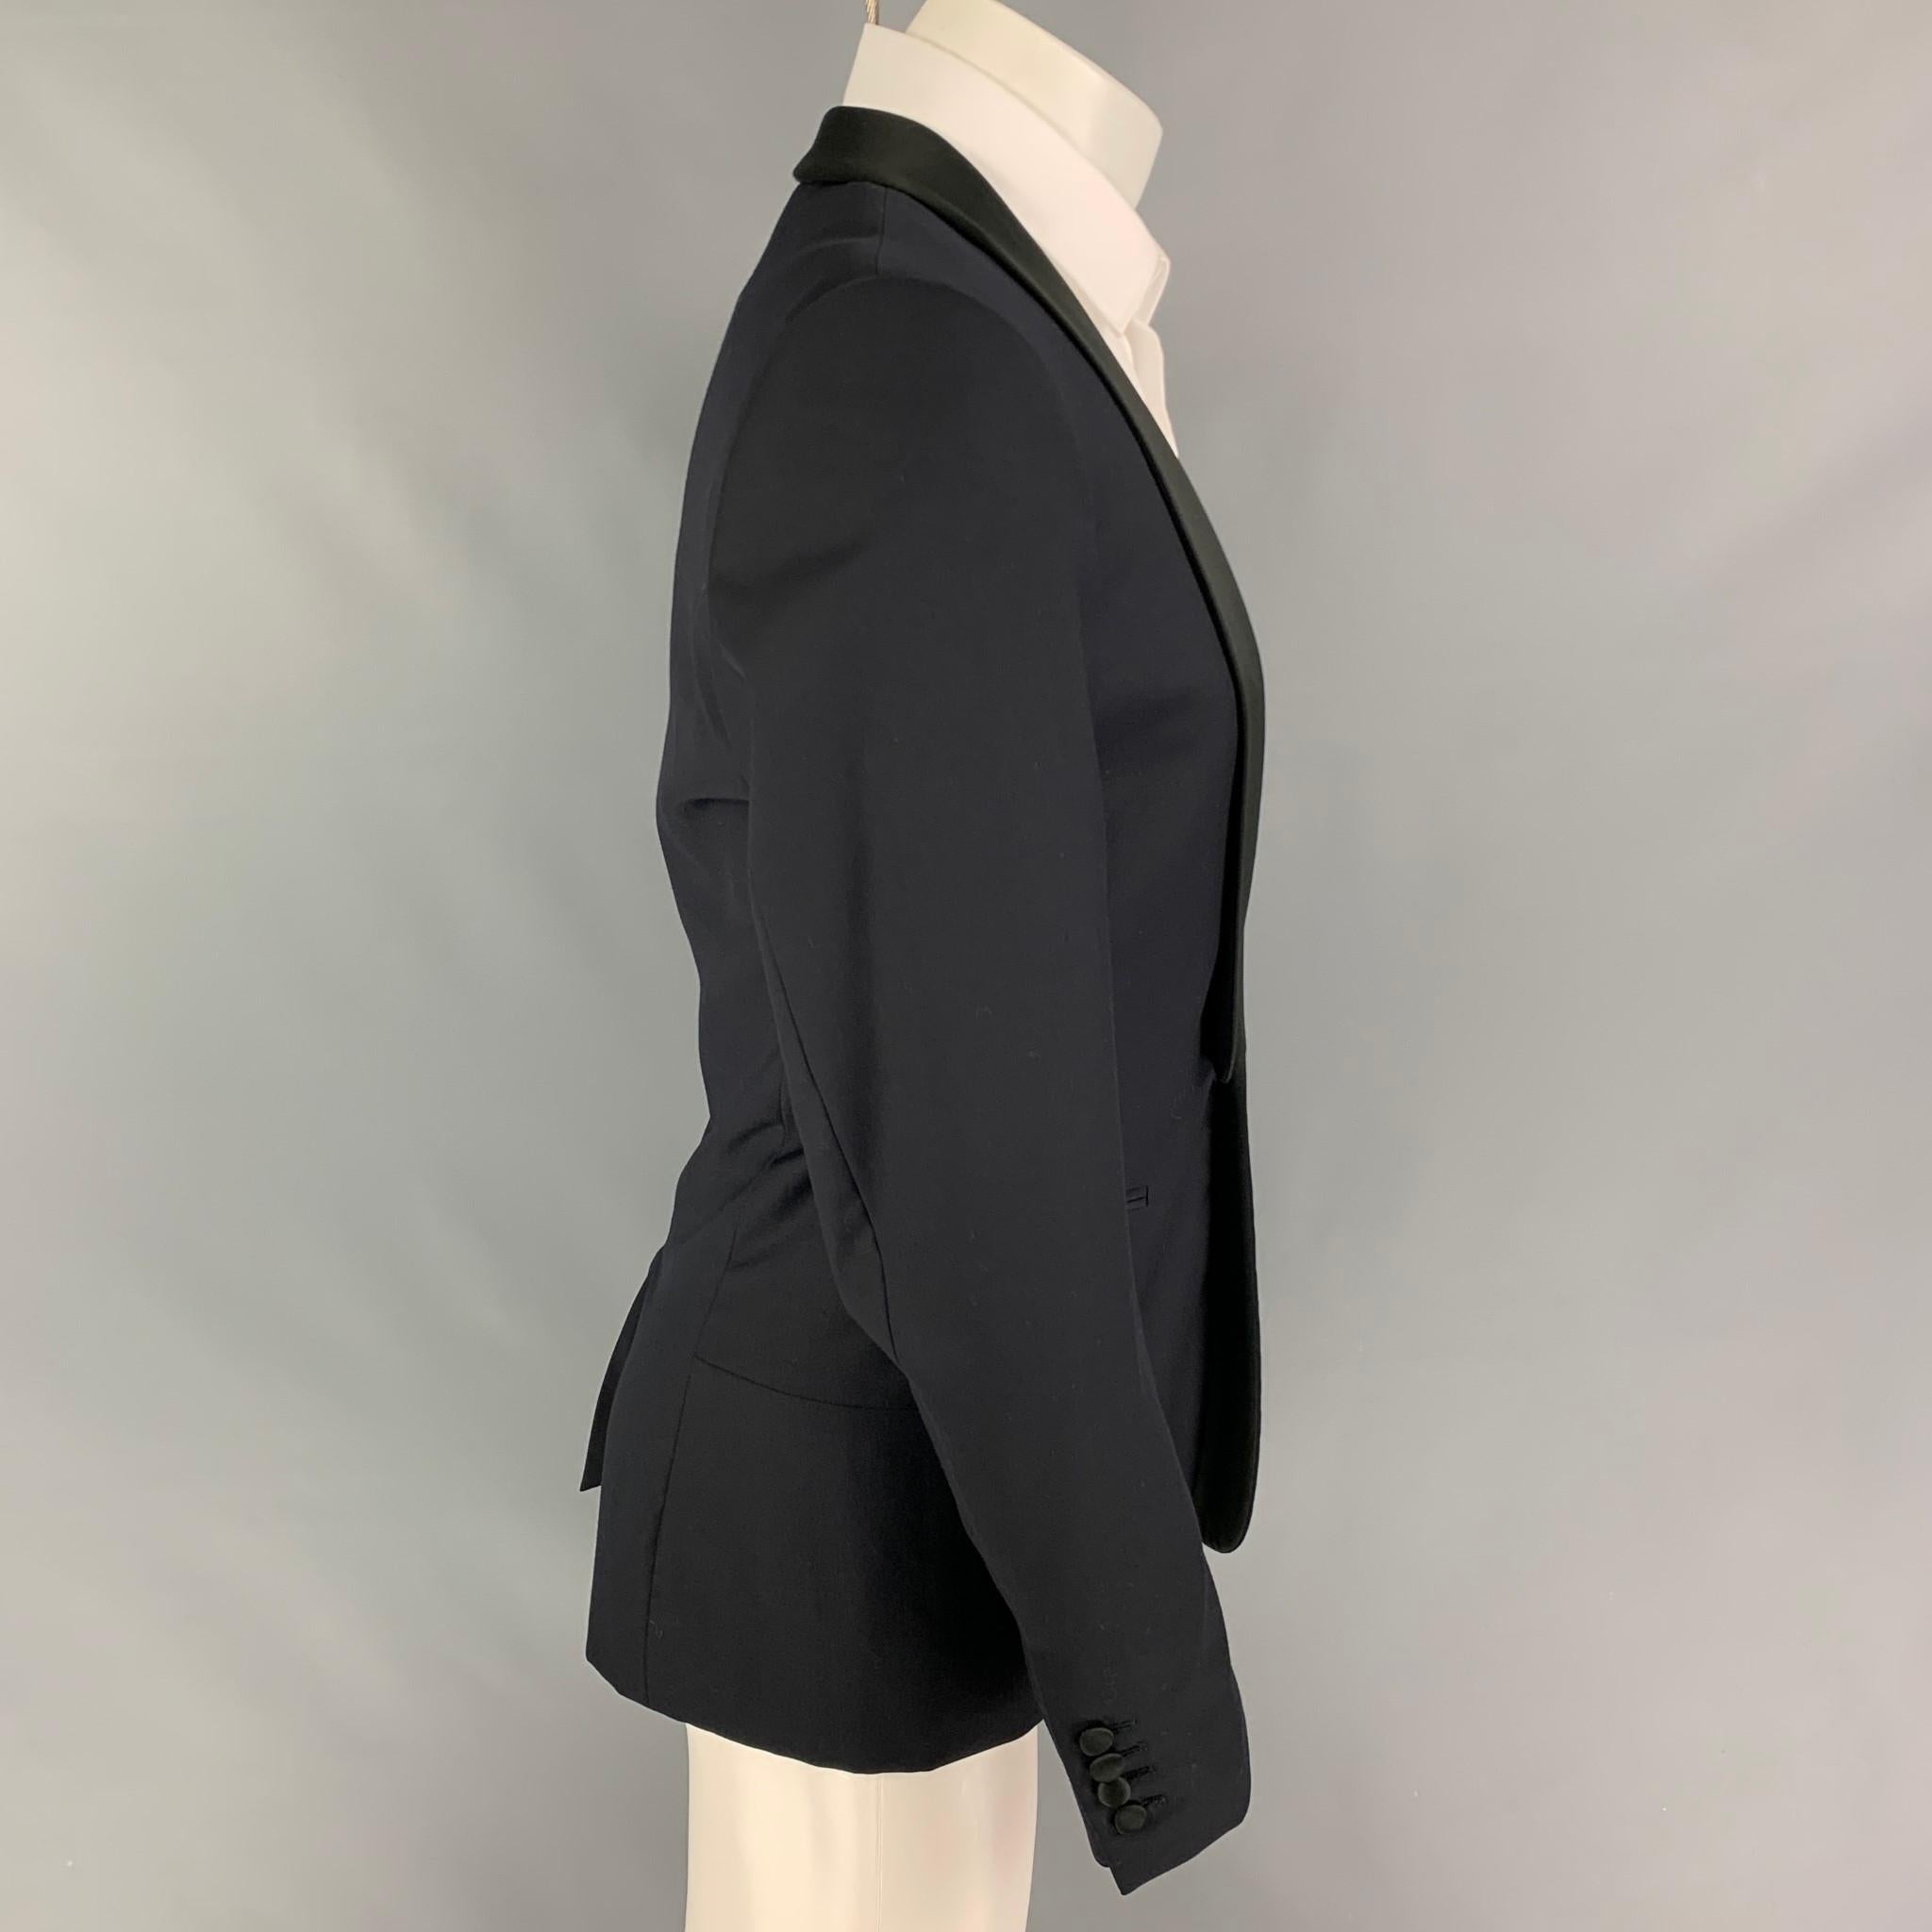 SANDRO sport coat comes in a black wool with a full liner featuring a shawl collar, slit pockets, single back vent, and a single button closure. 

Very Good Pre-Owned Condition.
Marked: 48

Measurements:

Shoulder: 17.5 in.
Chest: 38 in.
Sleeve: